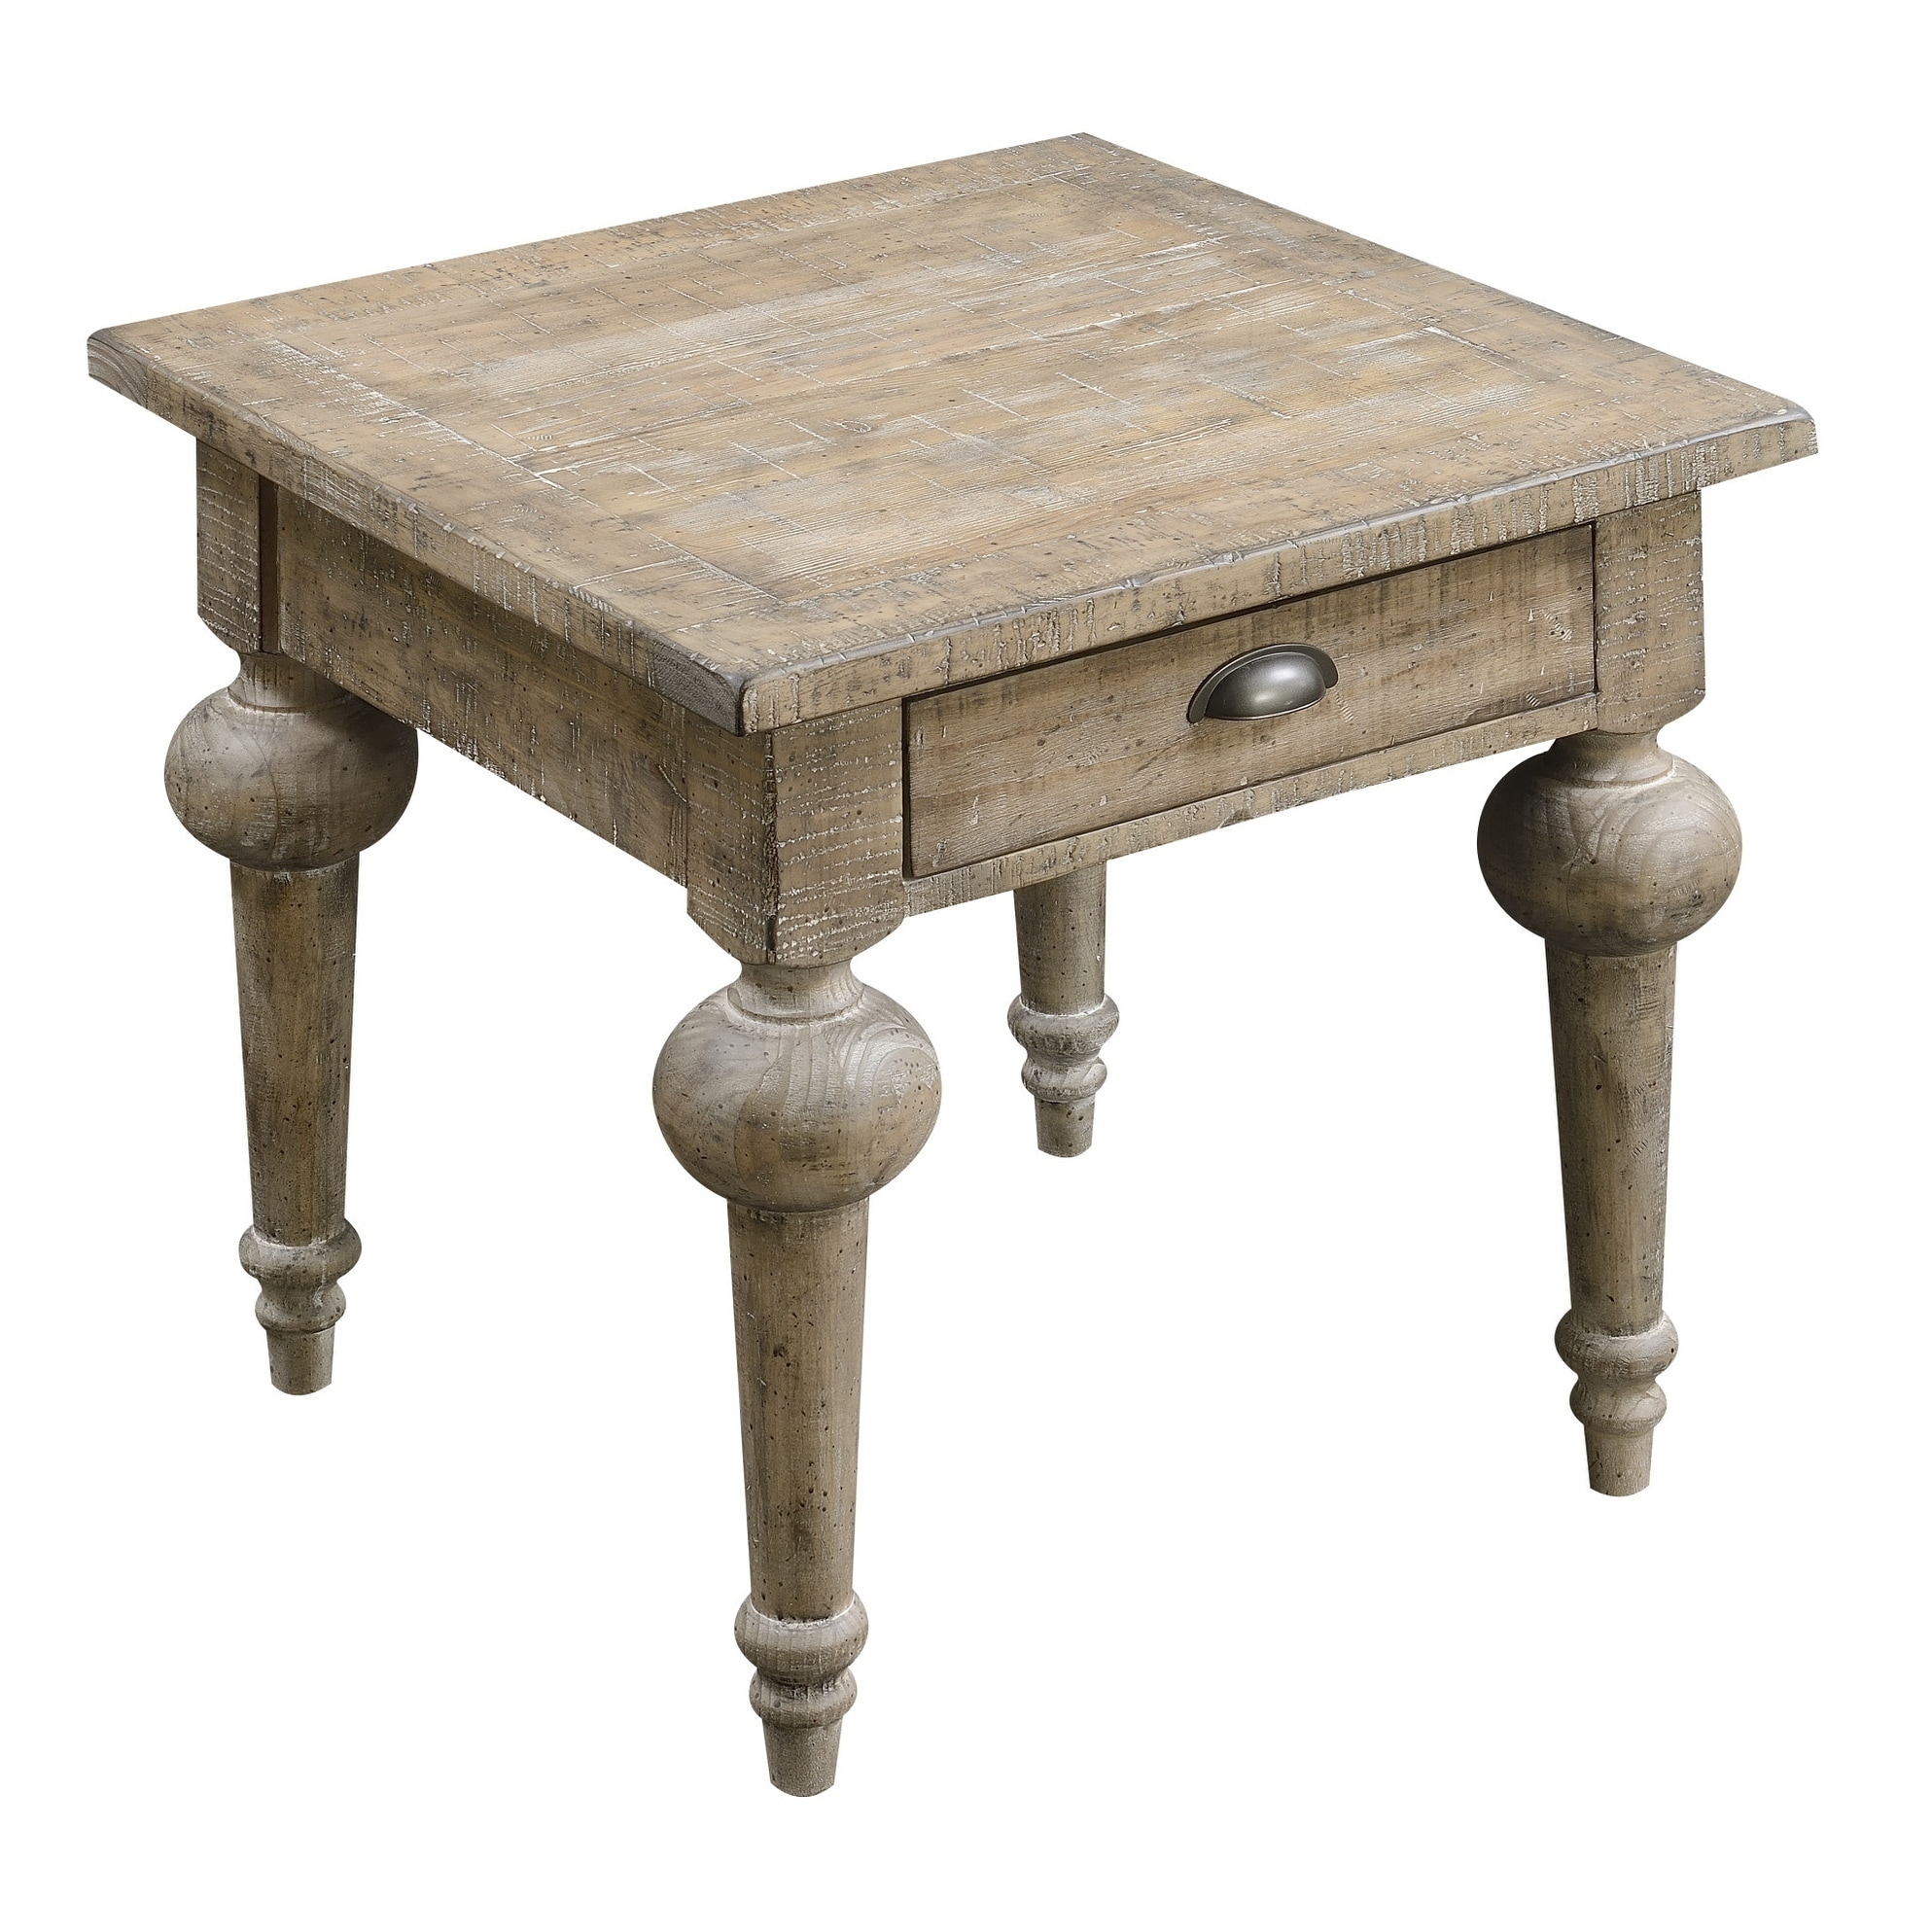 emerald home interlude sandstone gray square end table with one standard turned leg accent threshold drawer plank style top and legs dorm necessities sei mirage mirrored metal